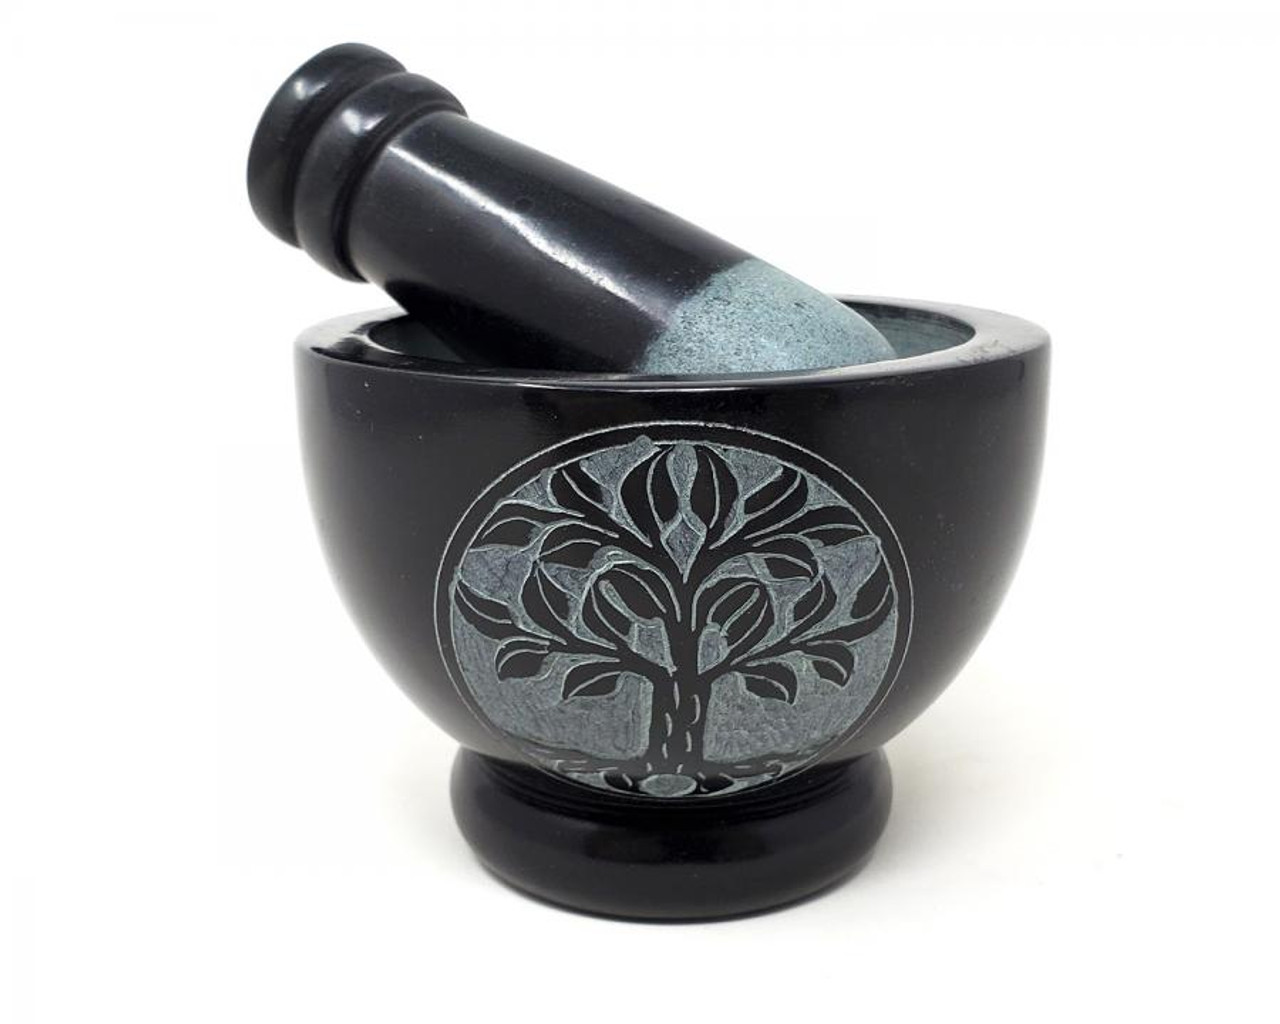 Tree of Life Carved Black Soapstone Mortar & Pestle 3" High x 4" Wide